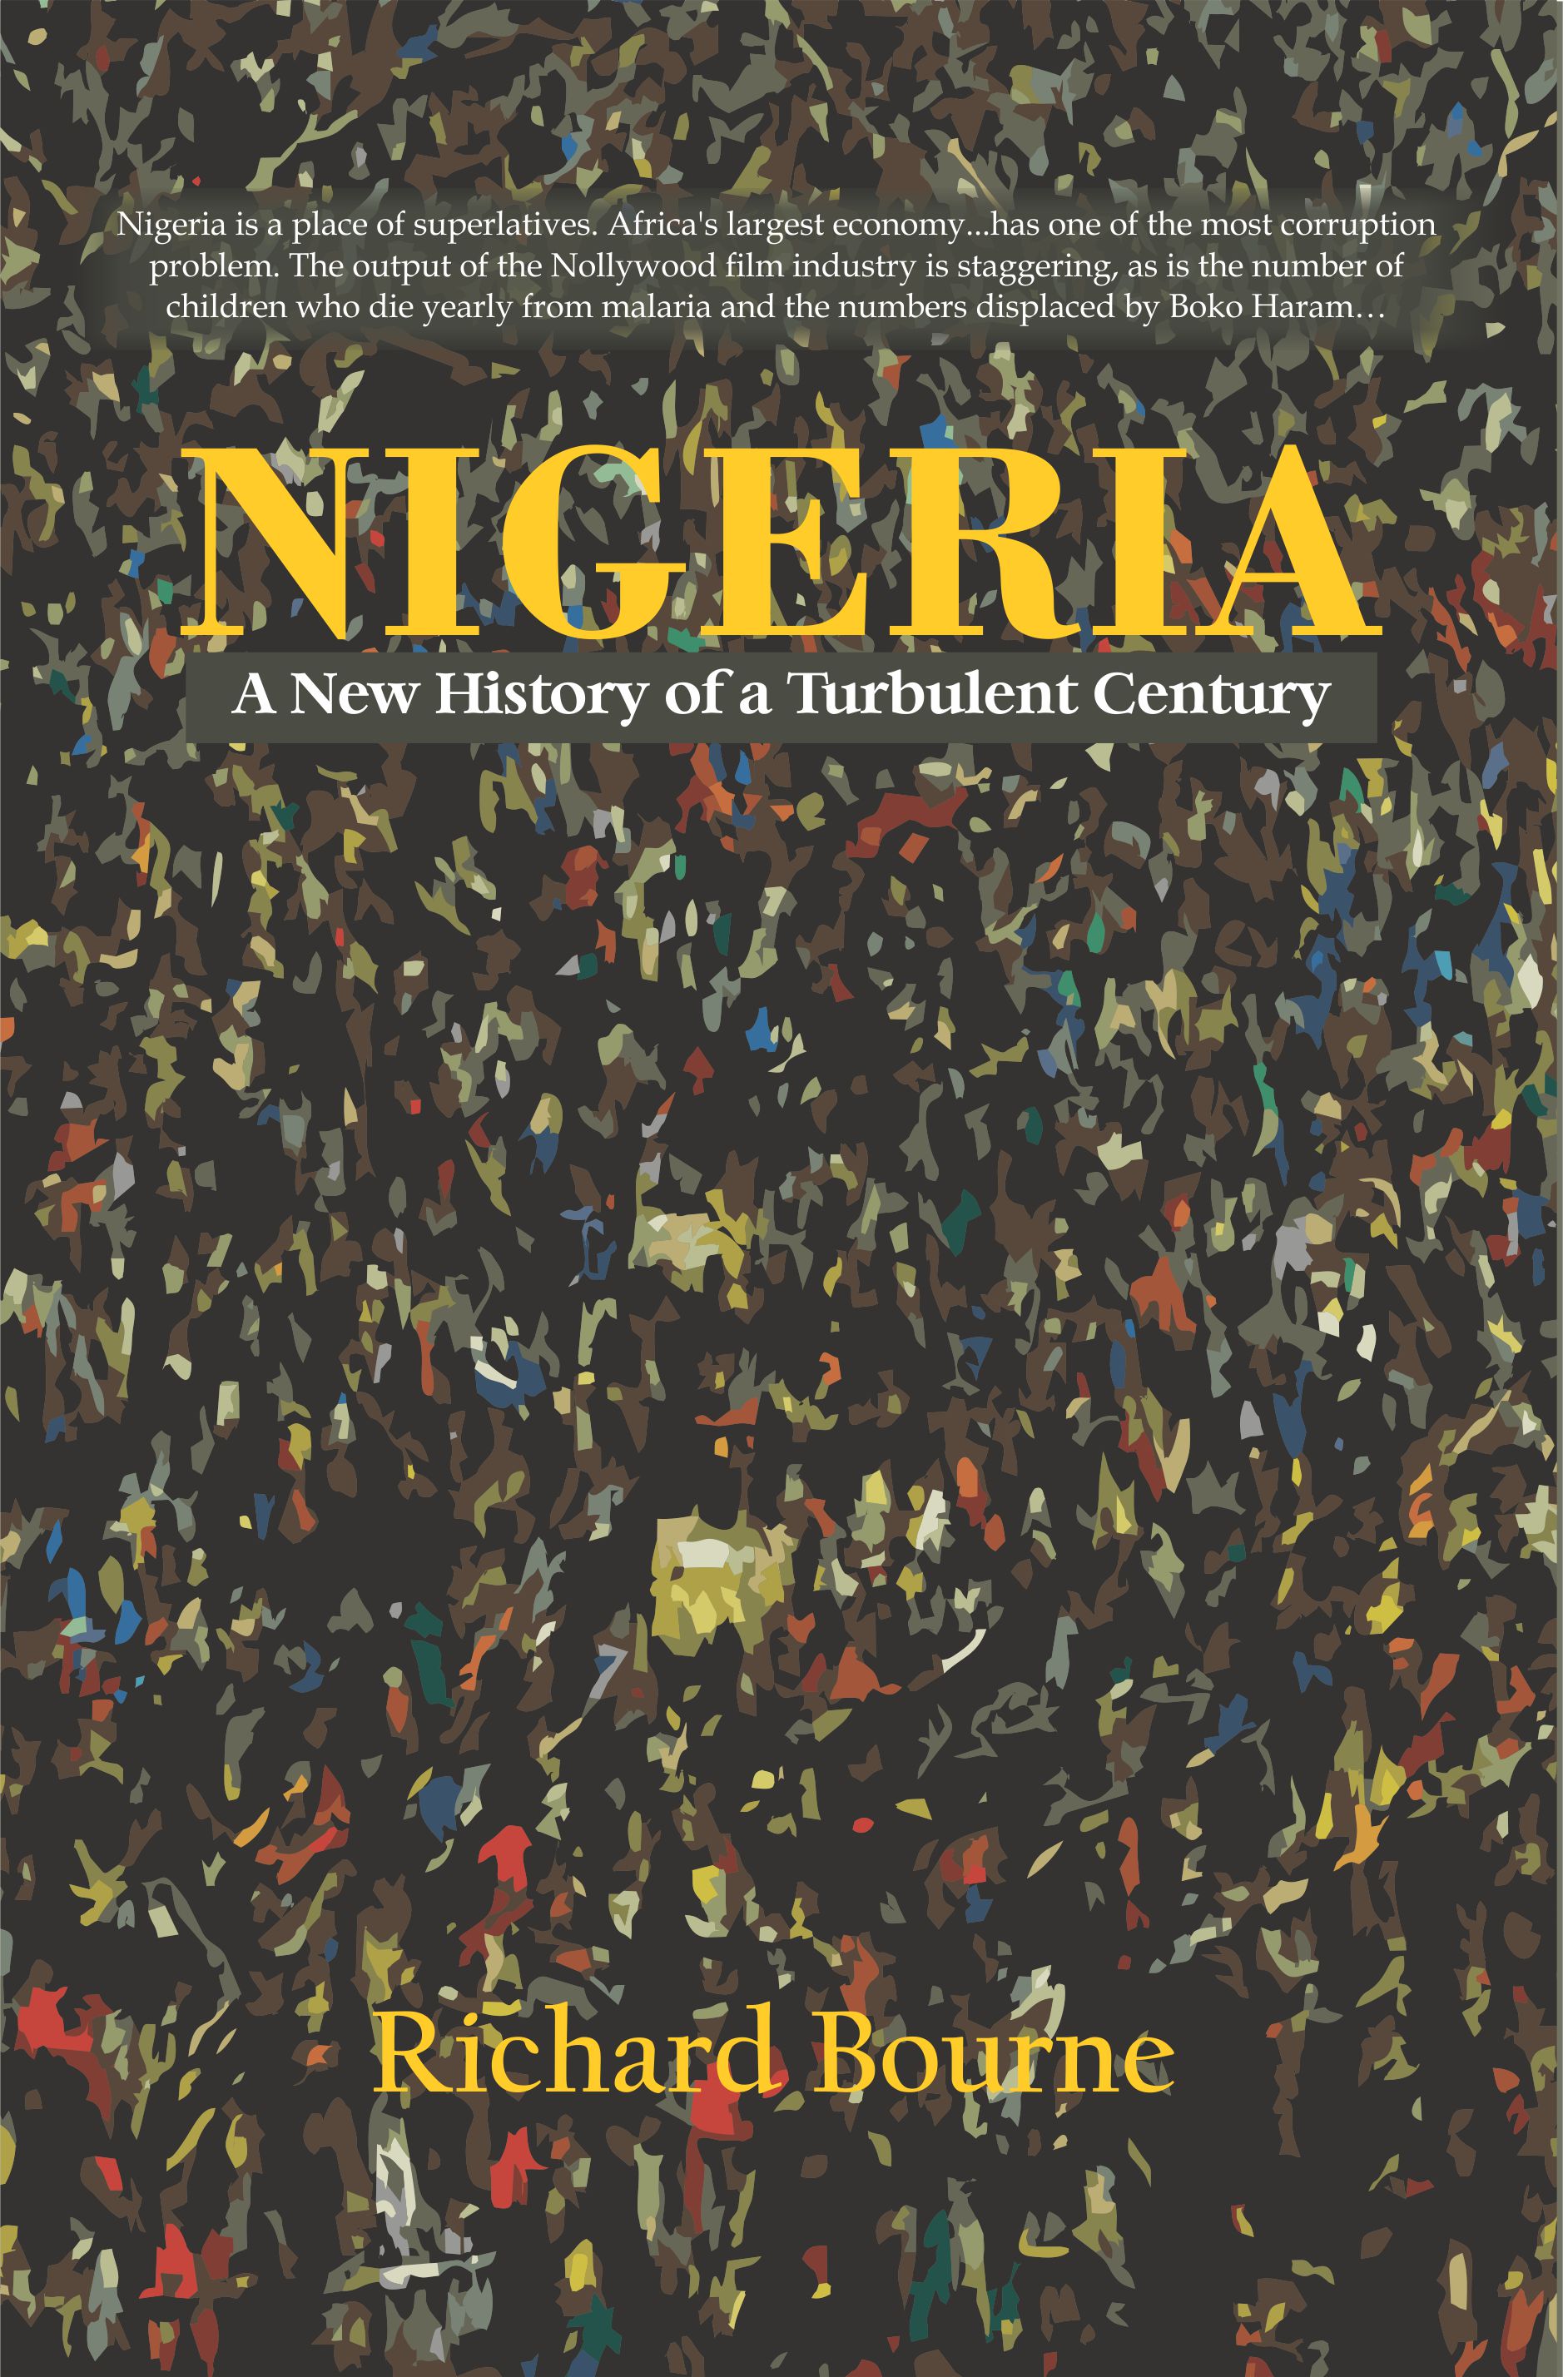 Book Review – Nigeria: A New History of a Turbulent Century by Bronwen Manby